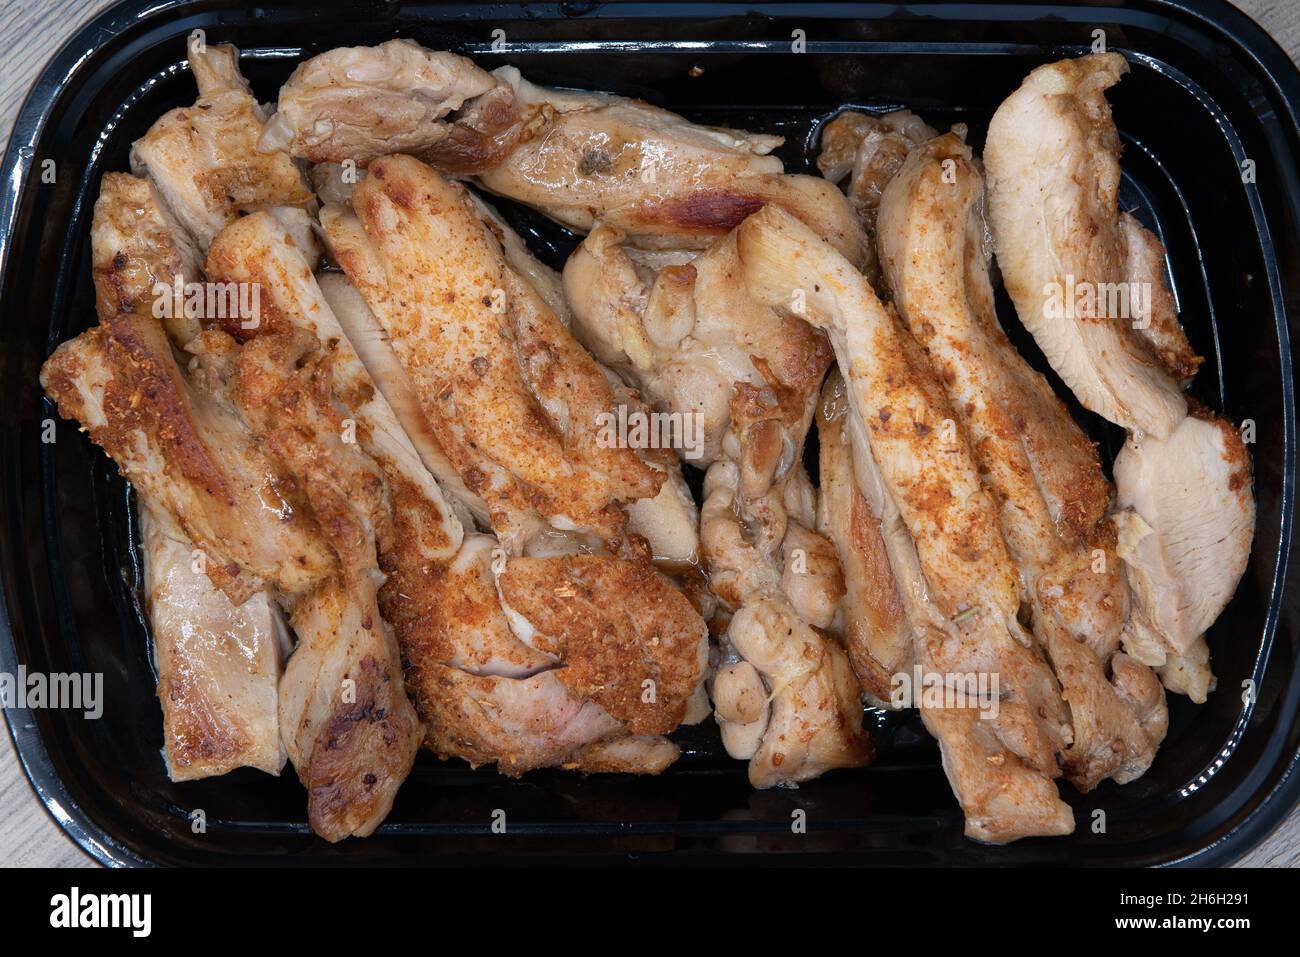 Overhead view of large side order appetizer of teriyaki chicken for that Chinese food craving. Stock Photo